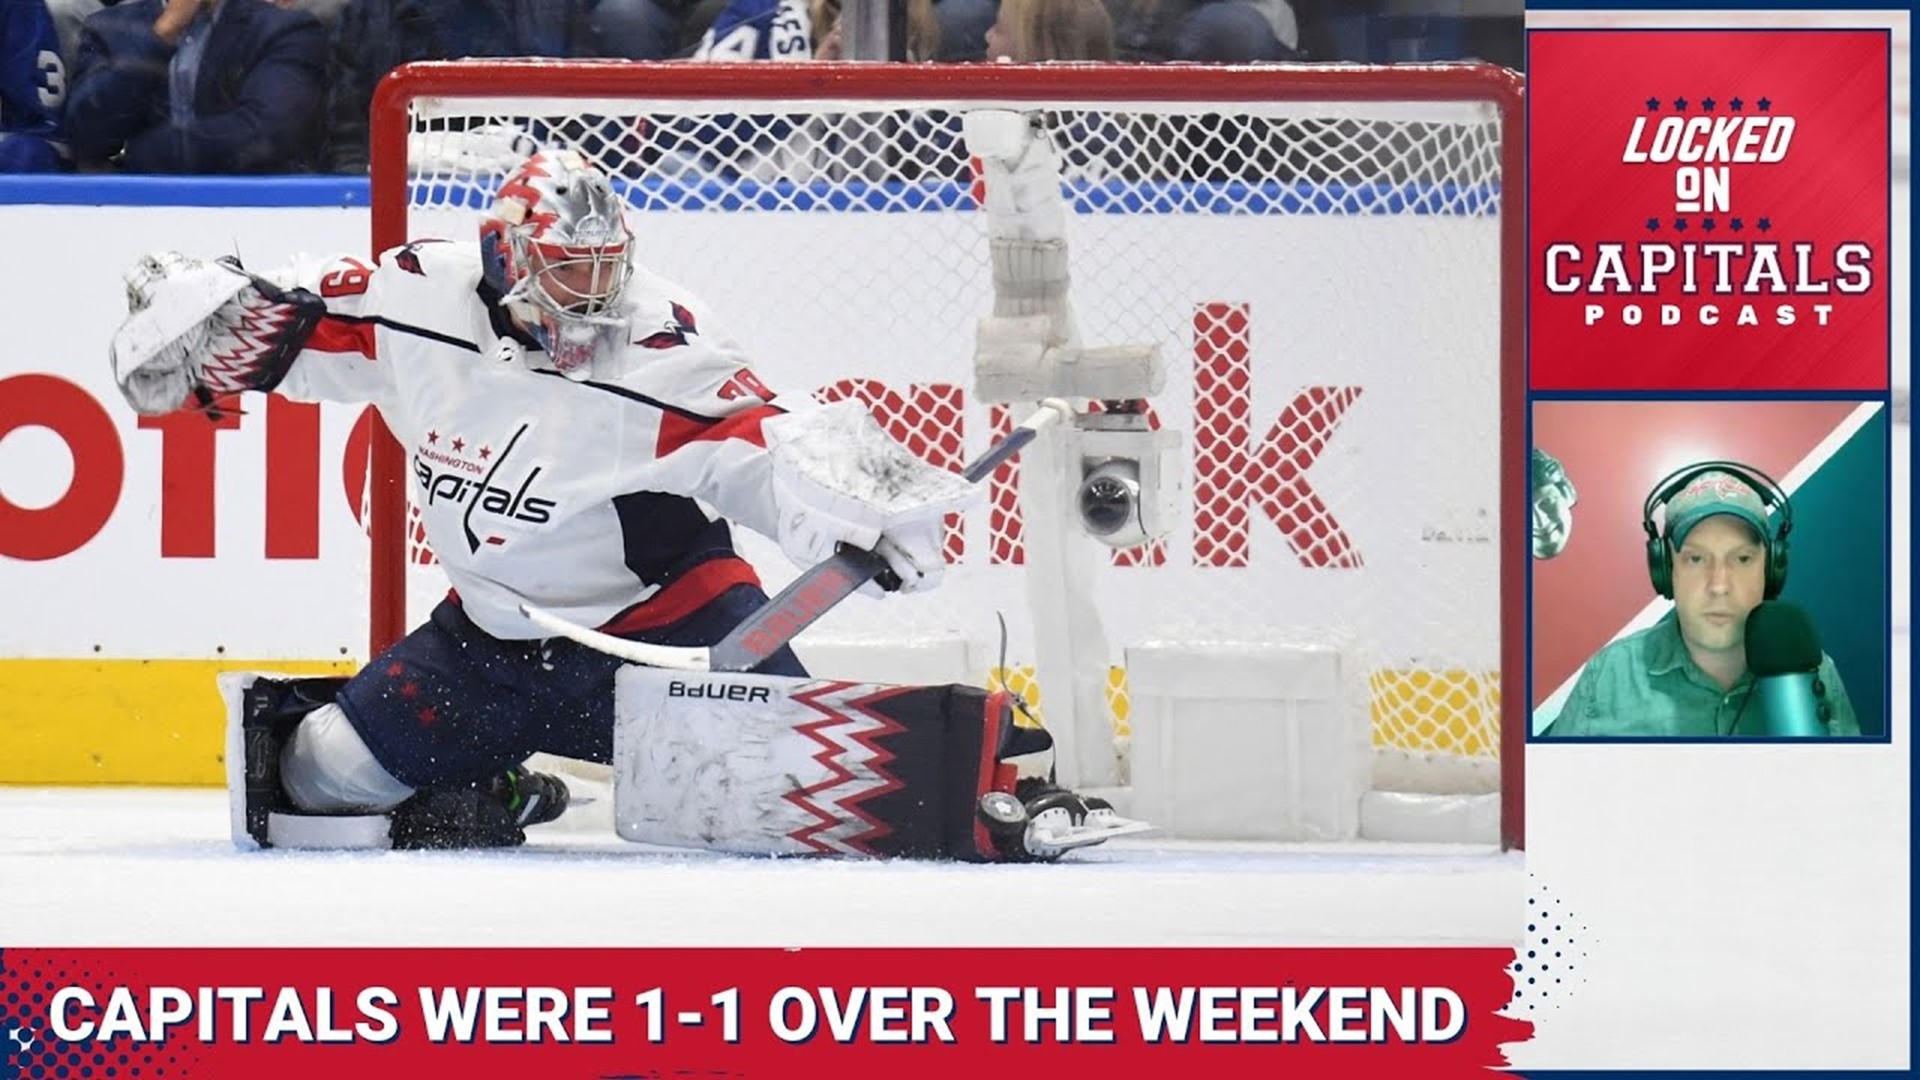 The Caps picked up a big win over the Calgary Flames on Friday night. The Caps took down the flames by a score of 3-0.